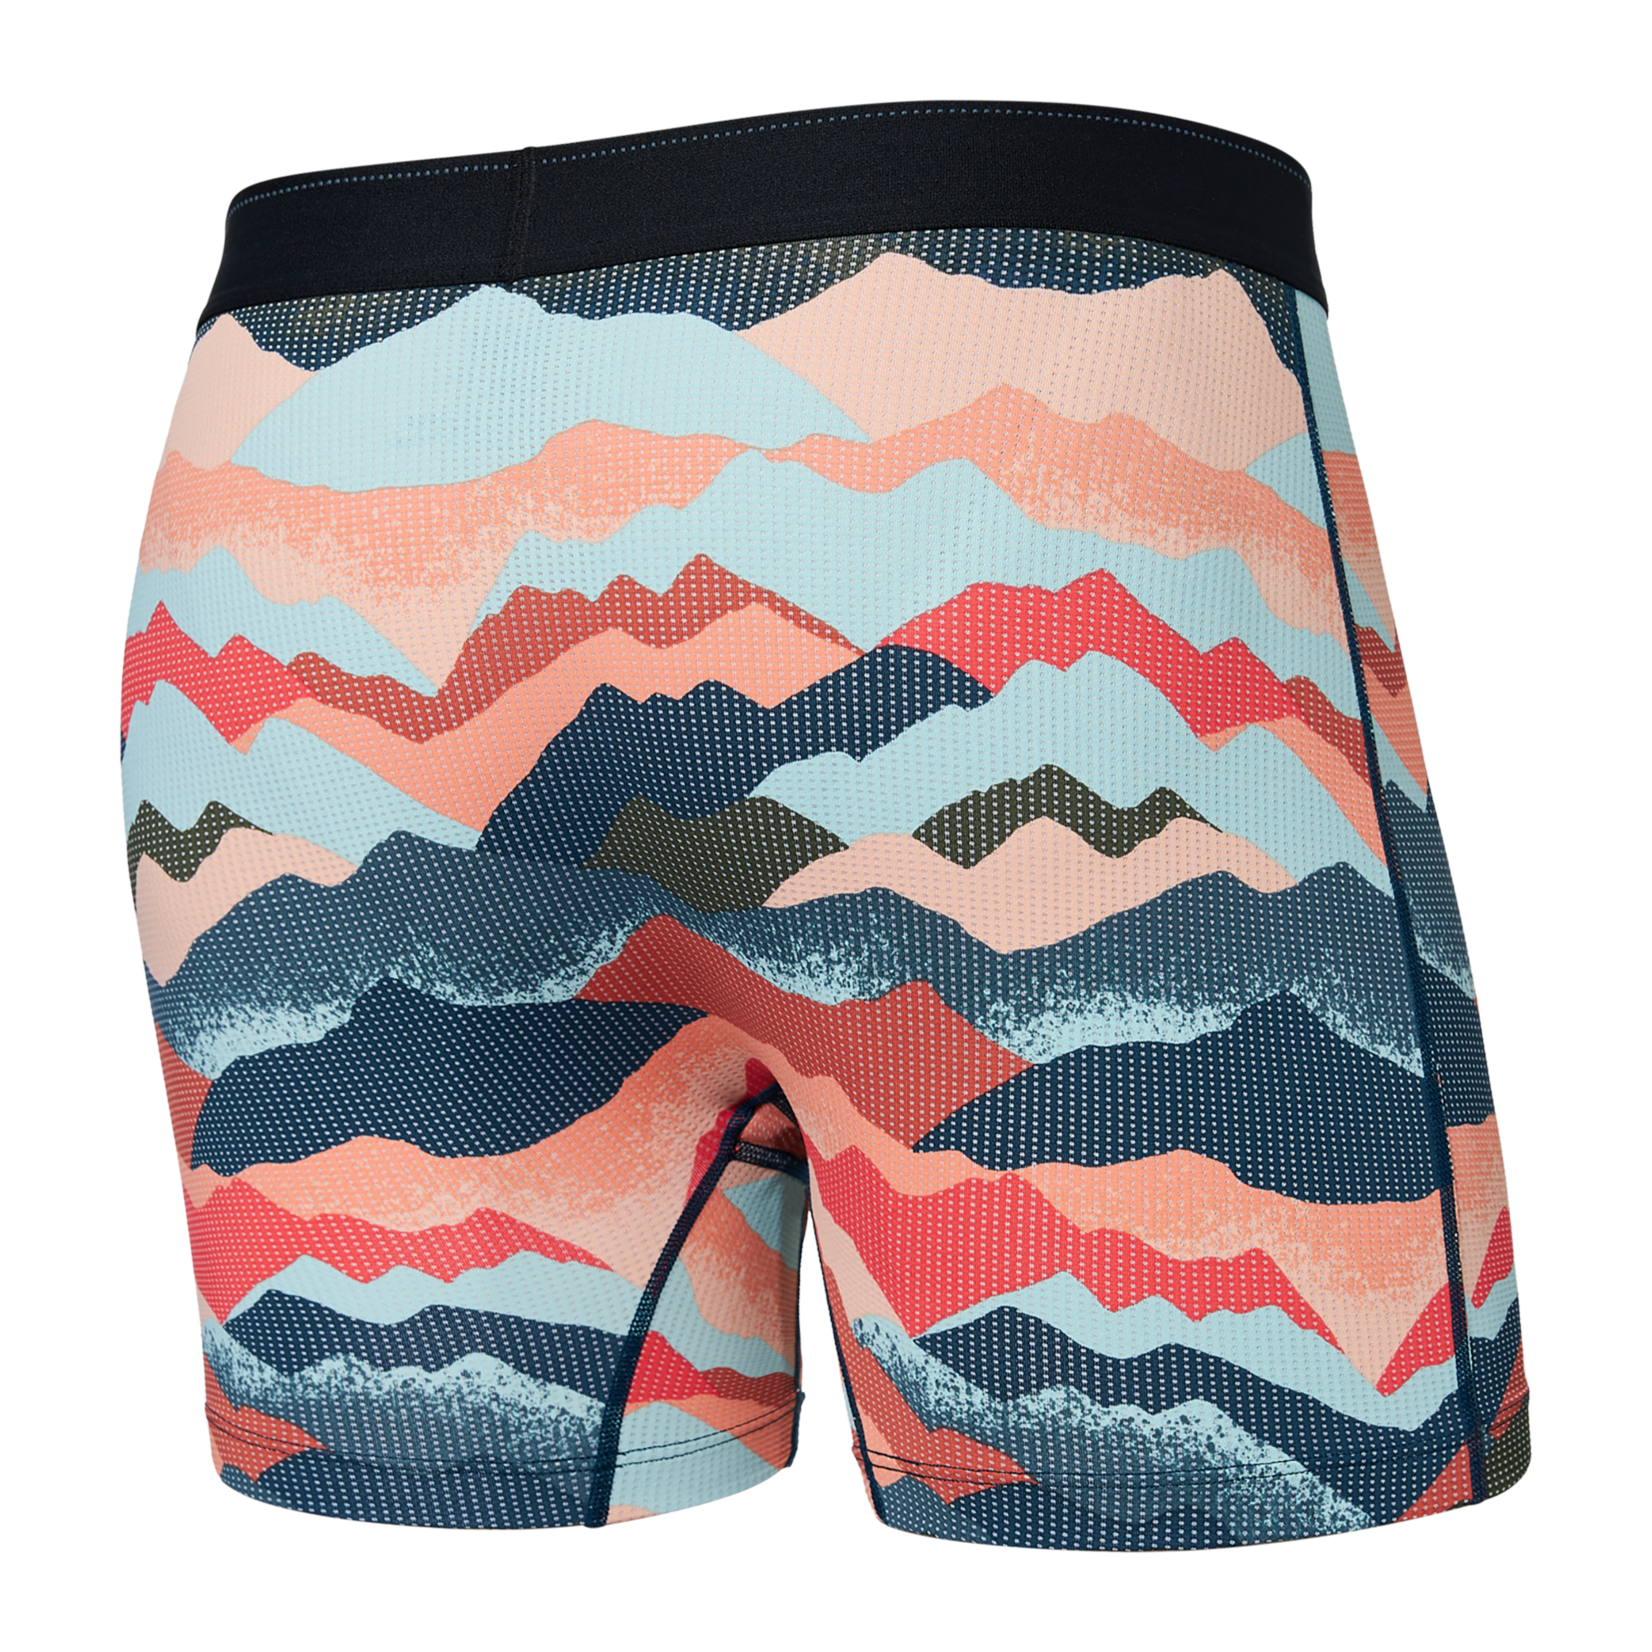 SAXX Quest Quick Dry Mesh Boxer Brief / Mountain Abstract- Multi